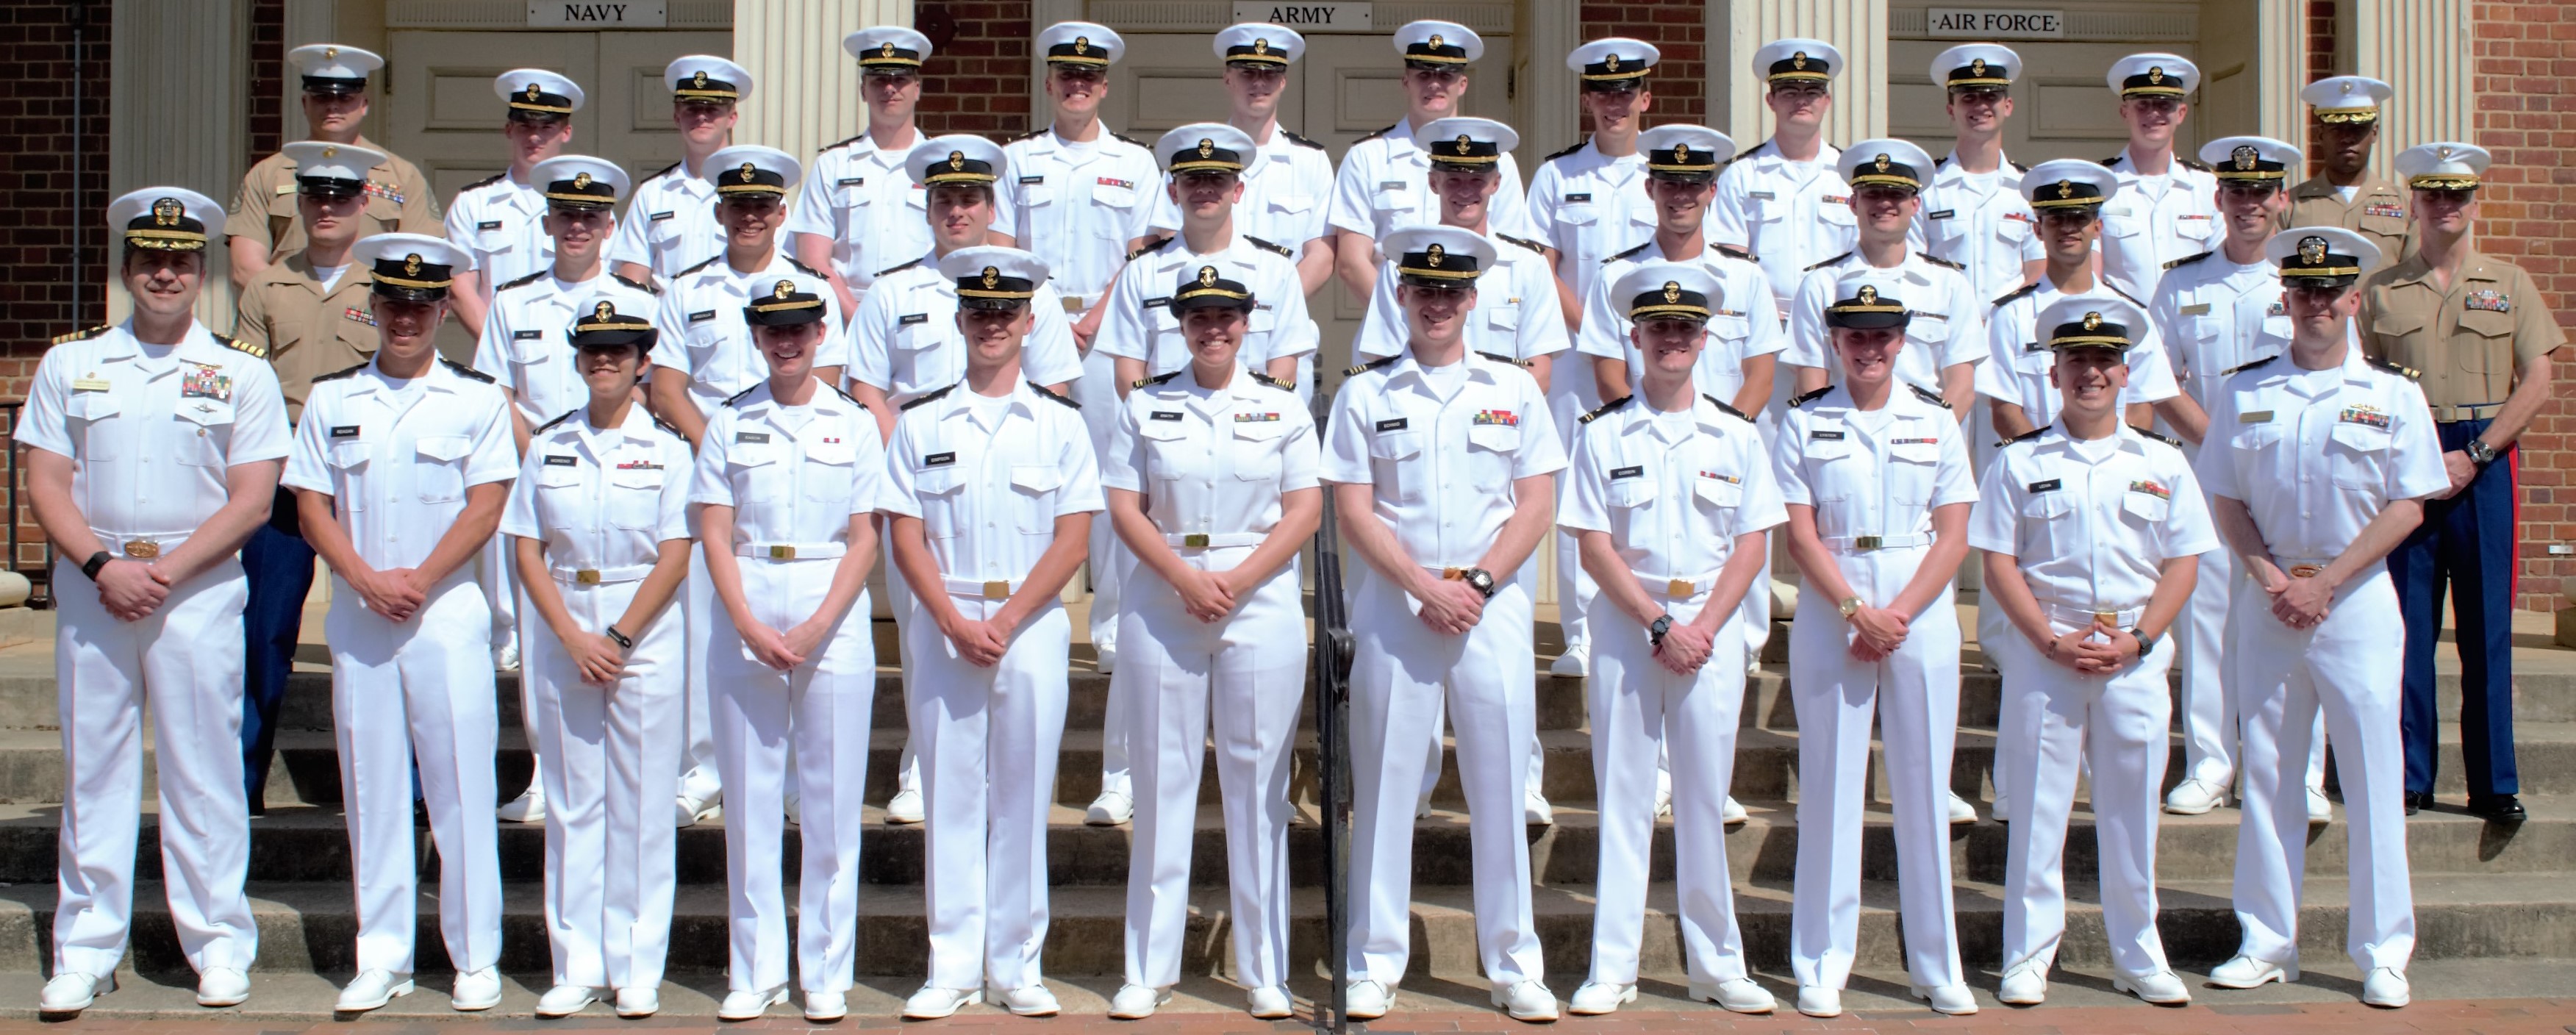 About - UNC NAVAL ROTC